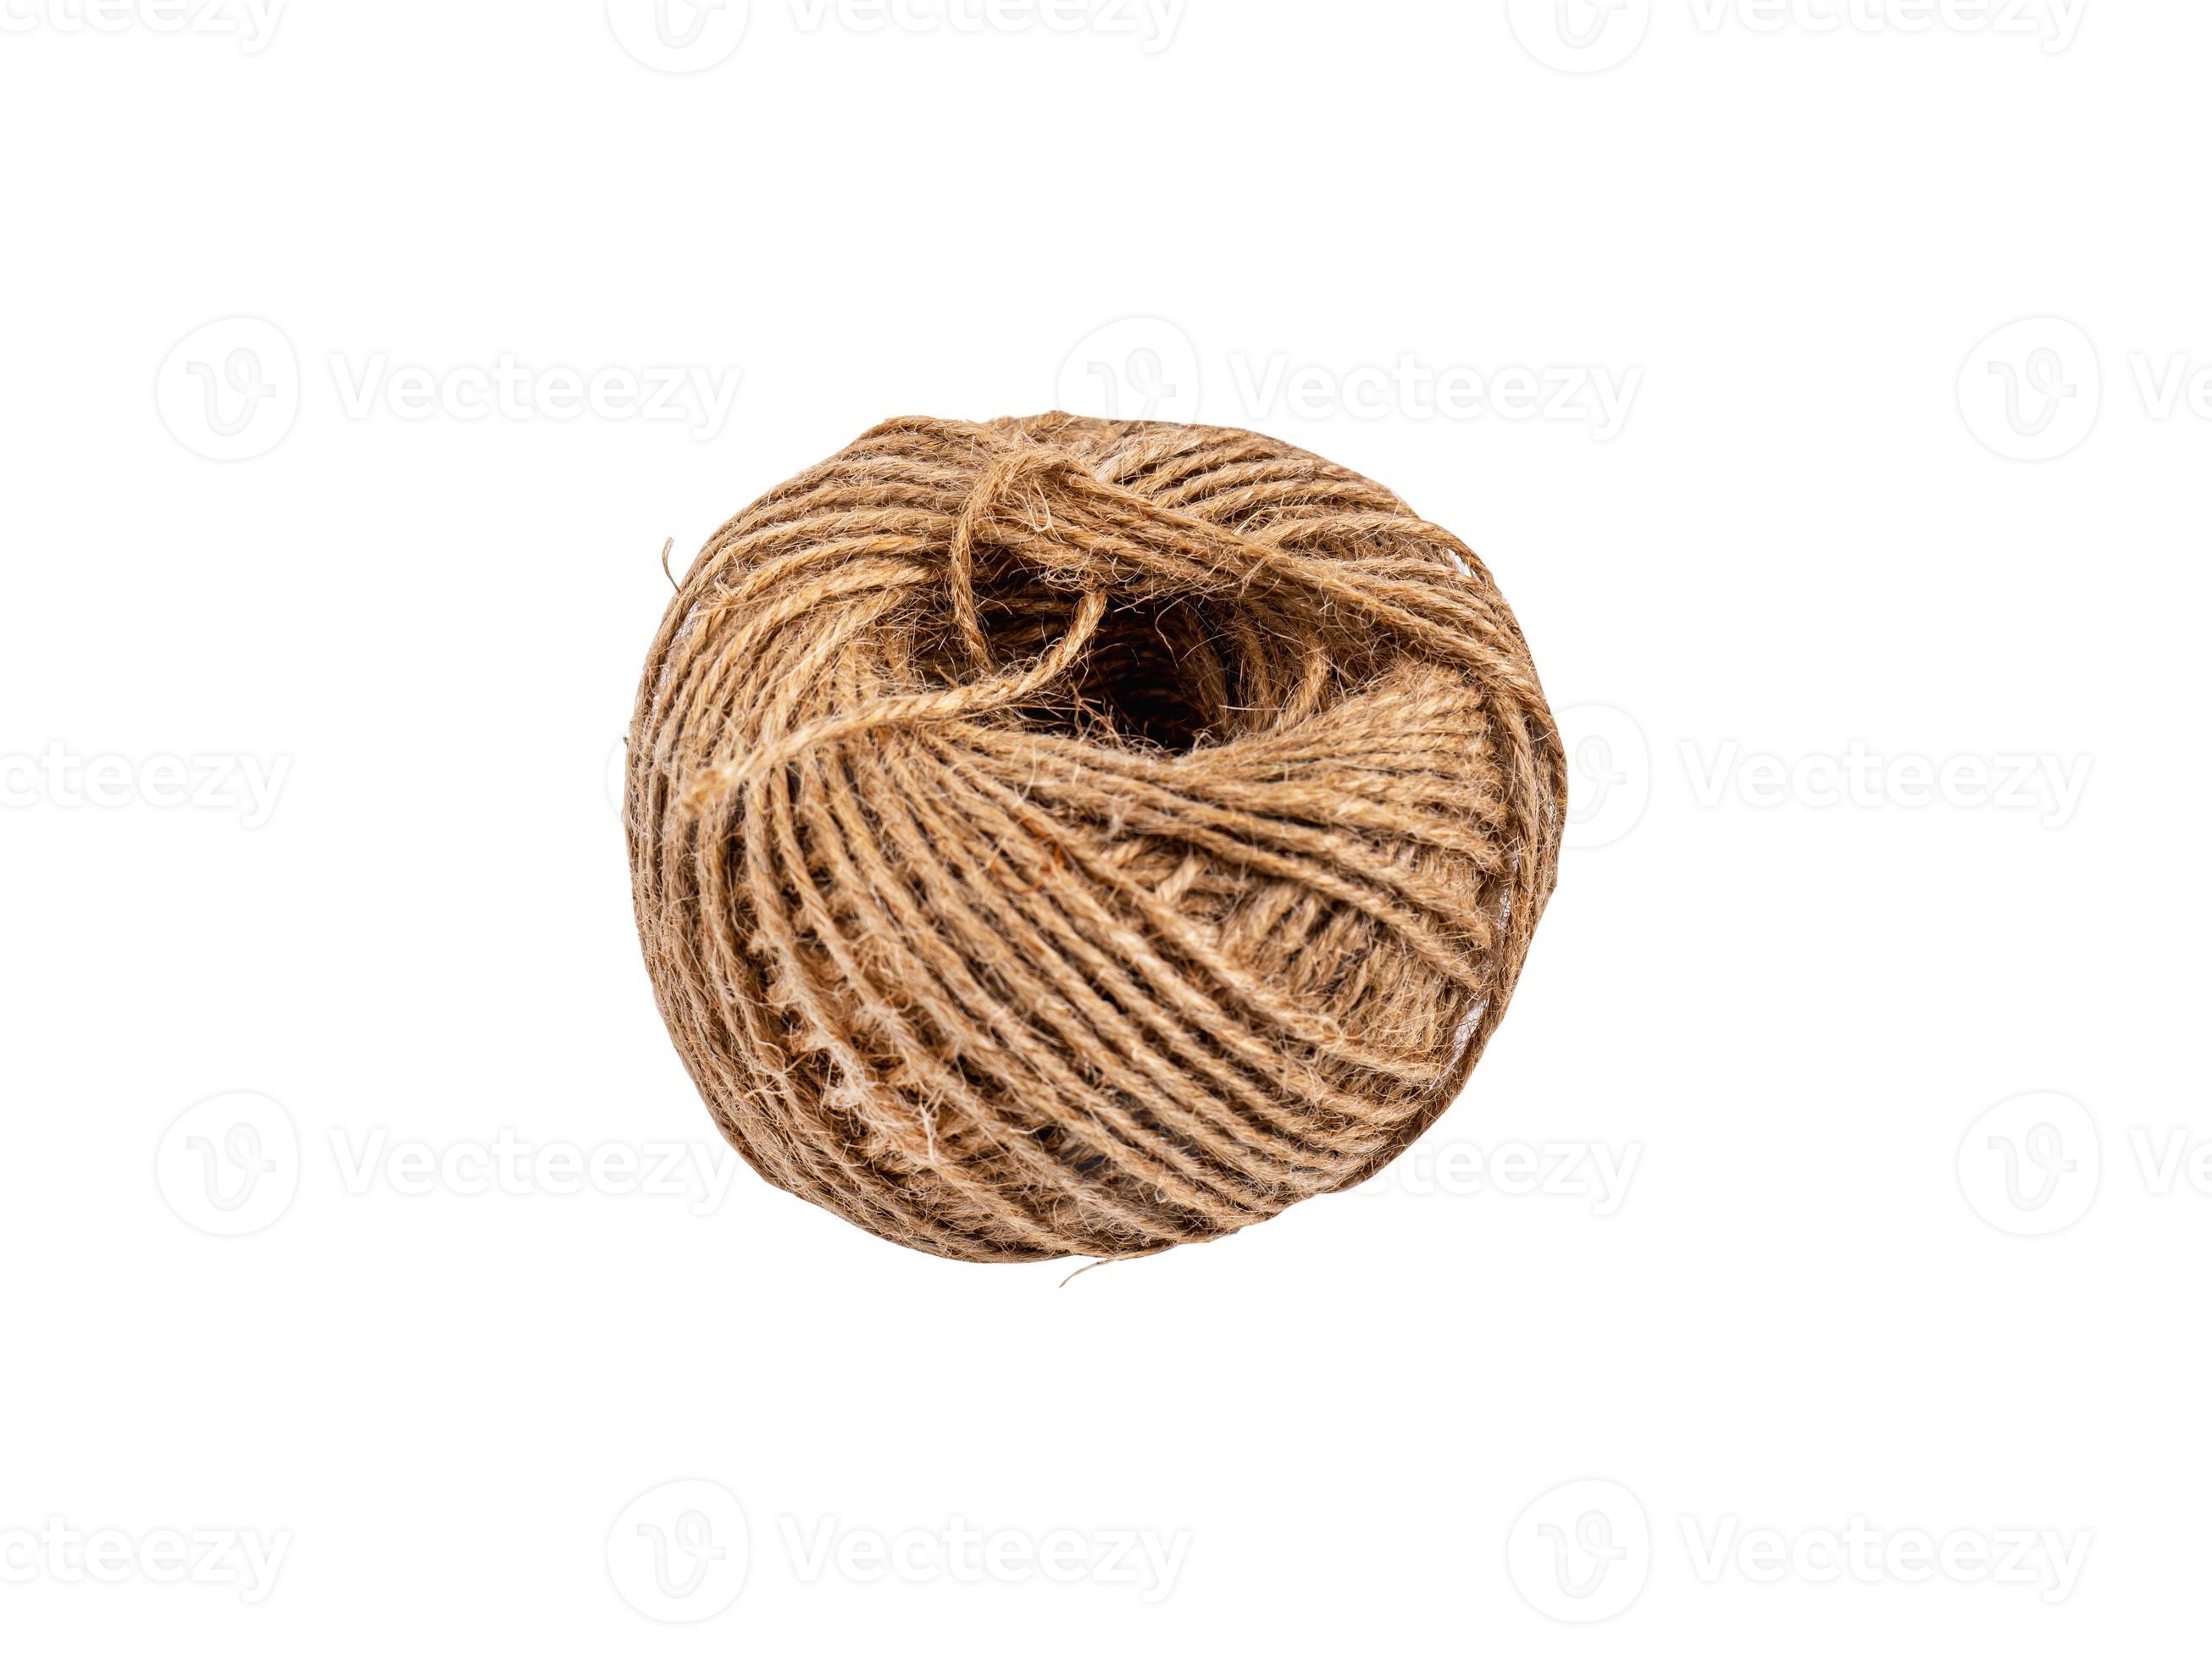 https://static.vecteezy.com/system/resources/previews/008/013/107/large_2x/coiled-raw-rope-made-of-various-fibers-into-a-long-rope-for-brown-crafts-white-background-isolated-clipping-path-studio-shot-photo.jpg